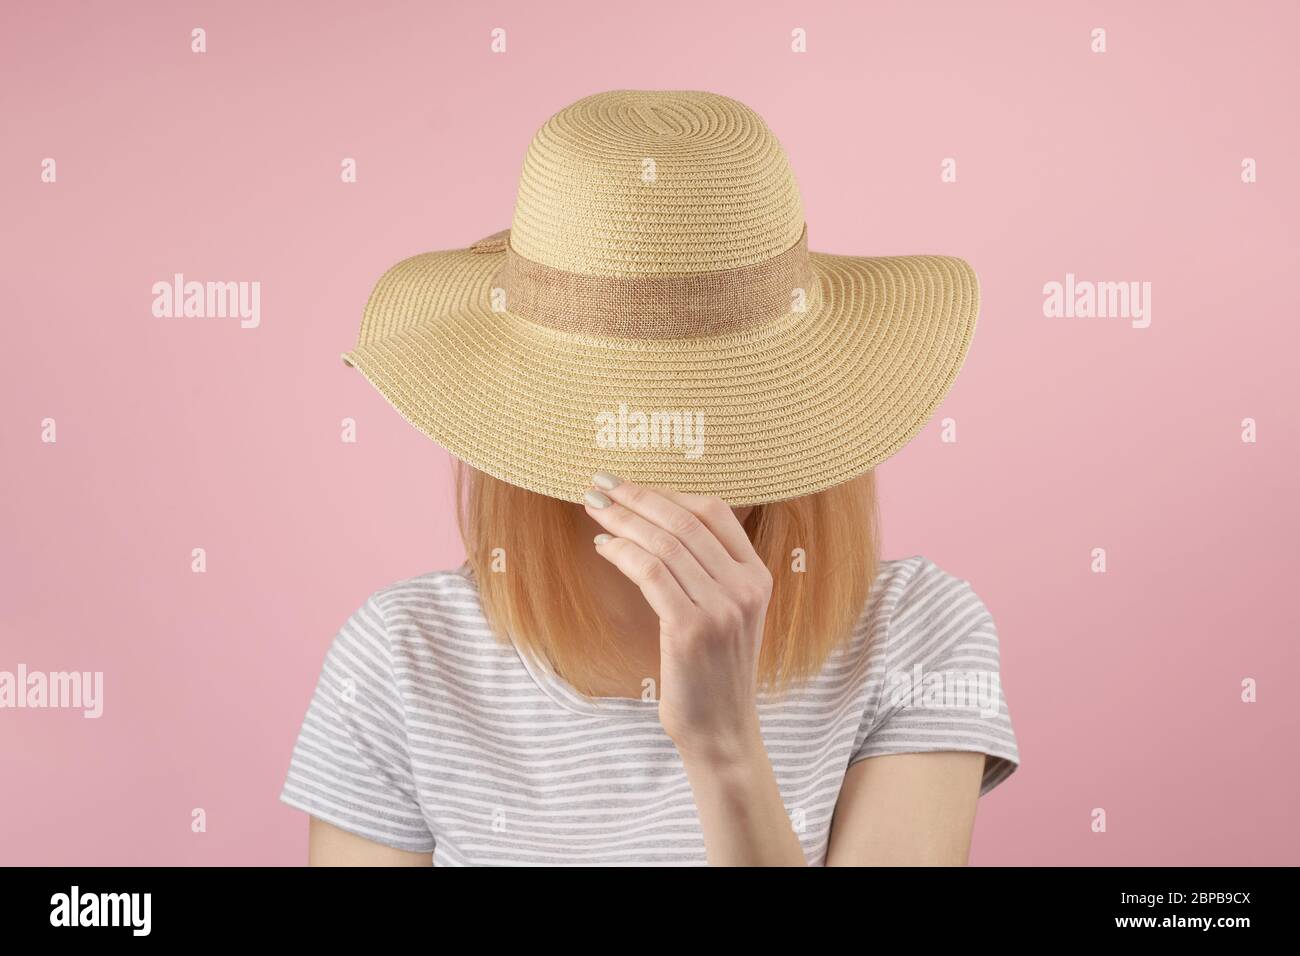 Redhair girl in gray tshirt hiding behind a straw hat as she pulls it down over her face with her hands. Frontal view upper body pink Stock Photo